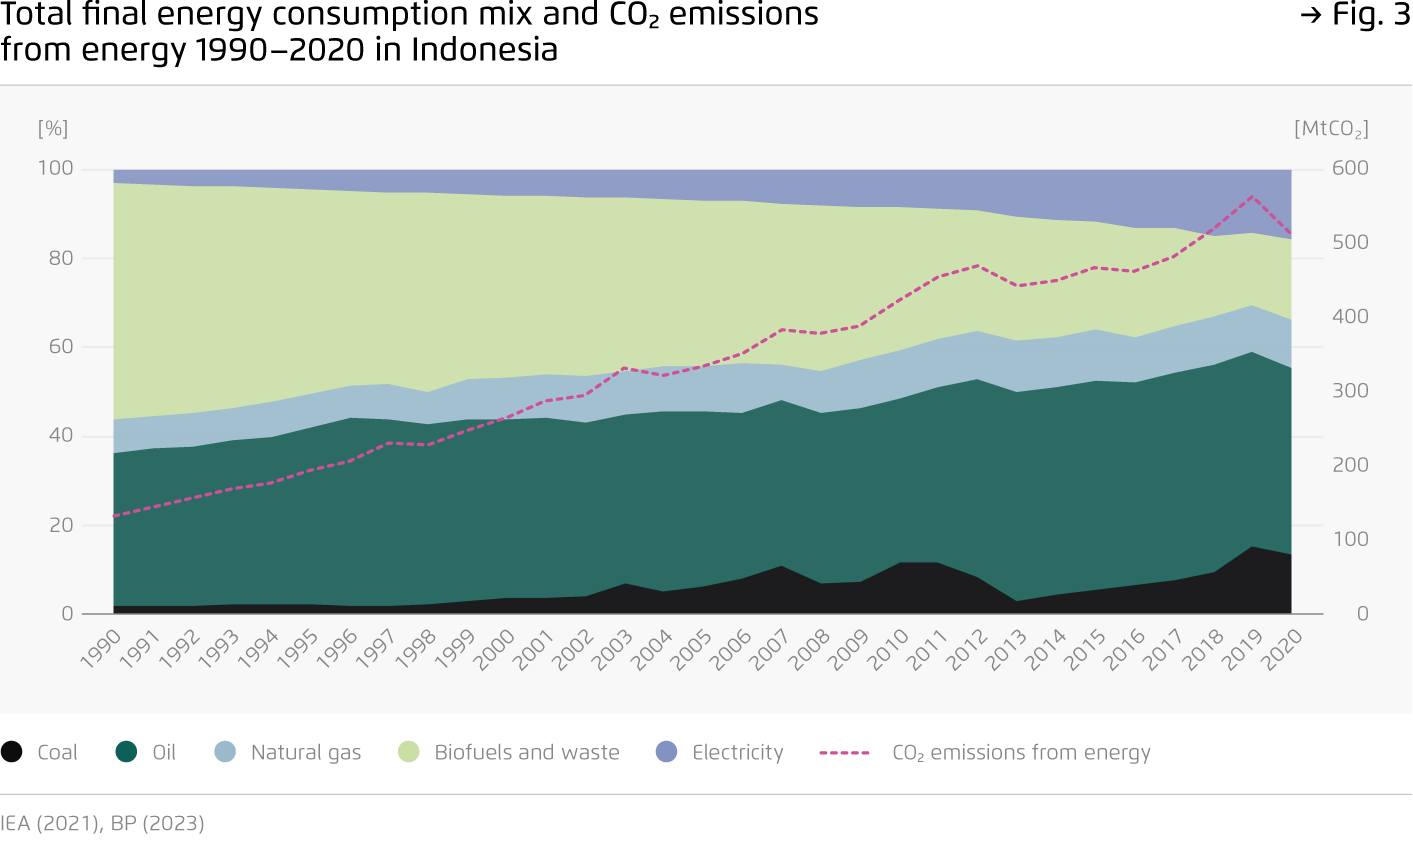 Preview for Total final energy consumption mix and CO2 emissions  from energy 1990–2020 in Indonesia